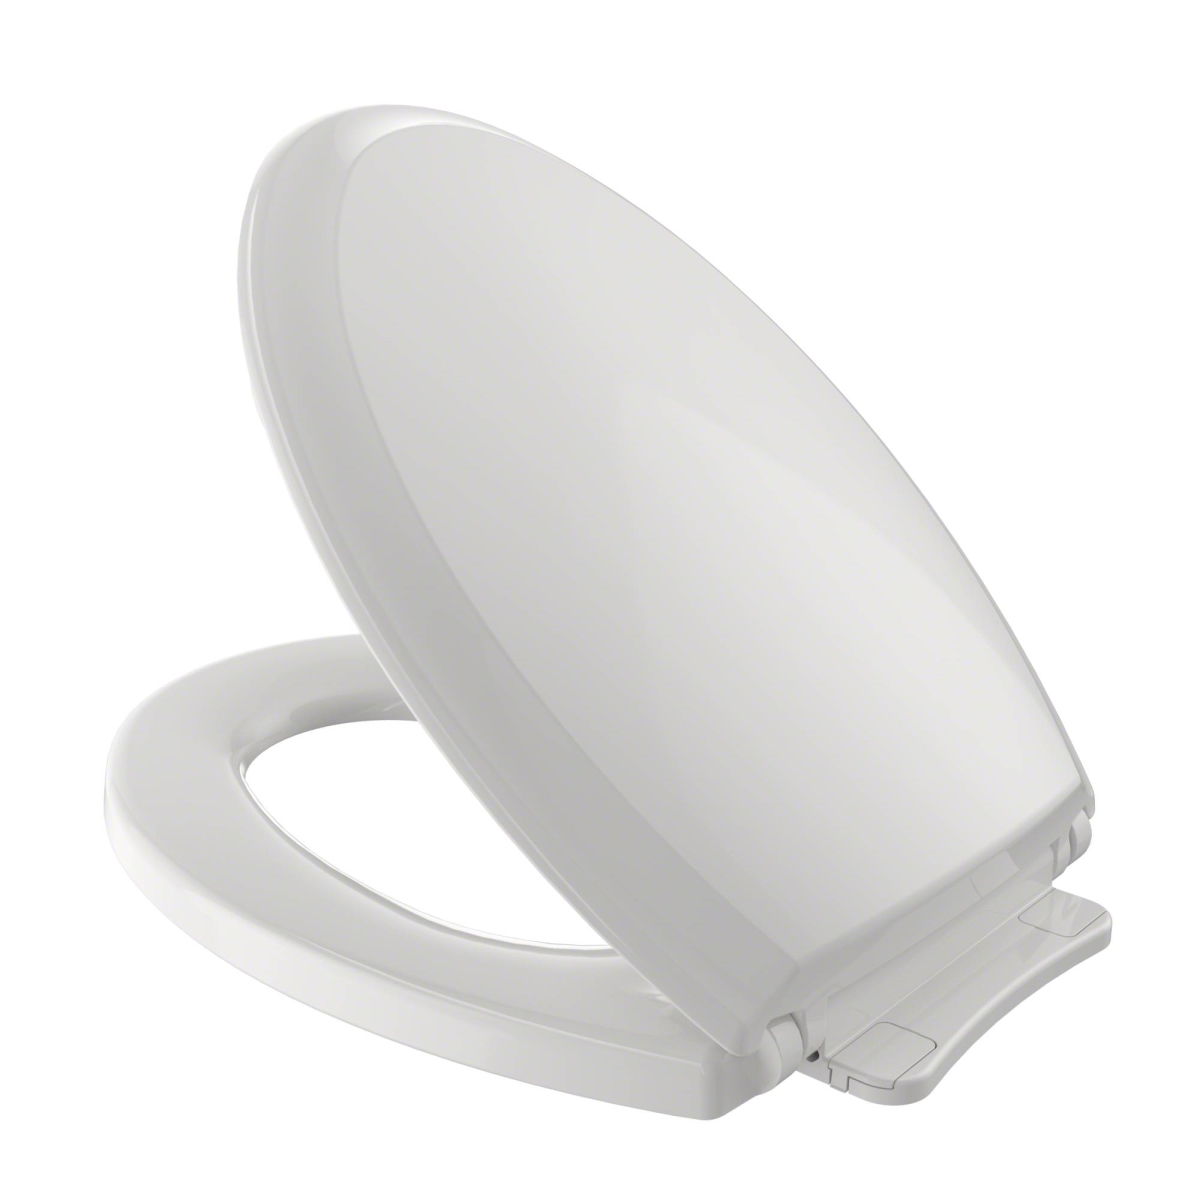 Ss224-11 Guinevere Softclose Slow Close Elongated Toilet Seat & Lid, Colonial White